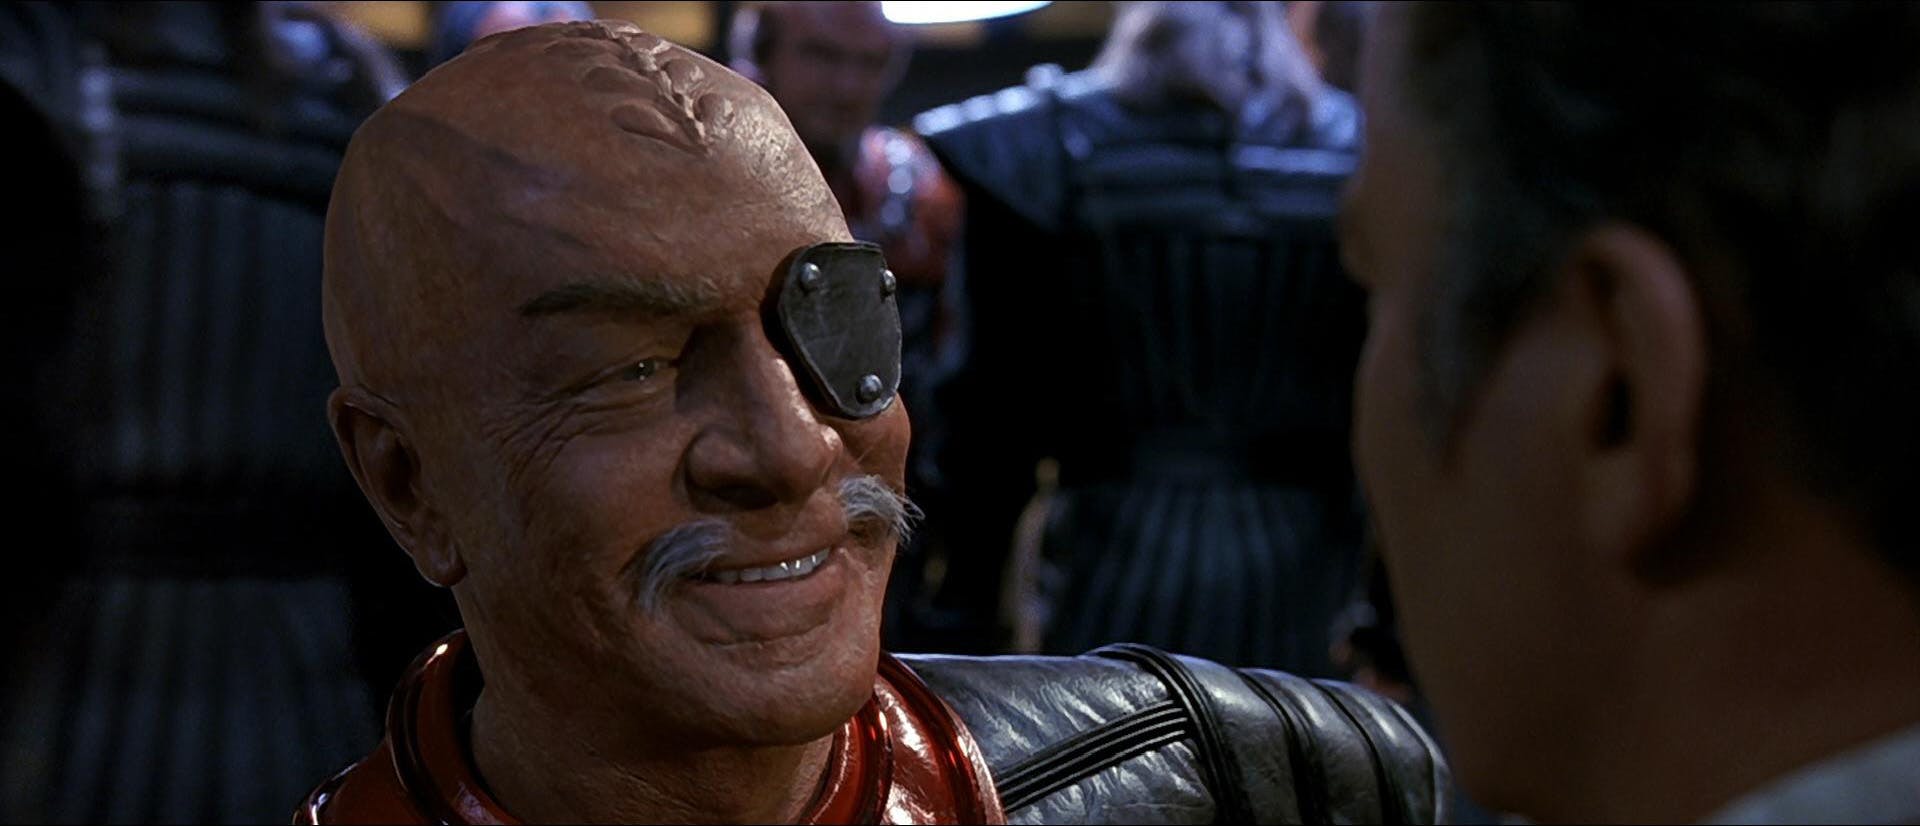 General Chang, standing in front of James Kirk, smiles a dastardly smile, before beaming off the Enterprise with their Klingon crew in Star Trek: The Undiscovered Country